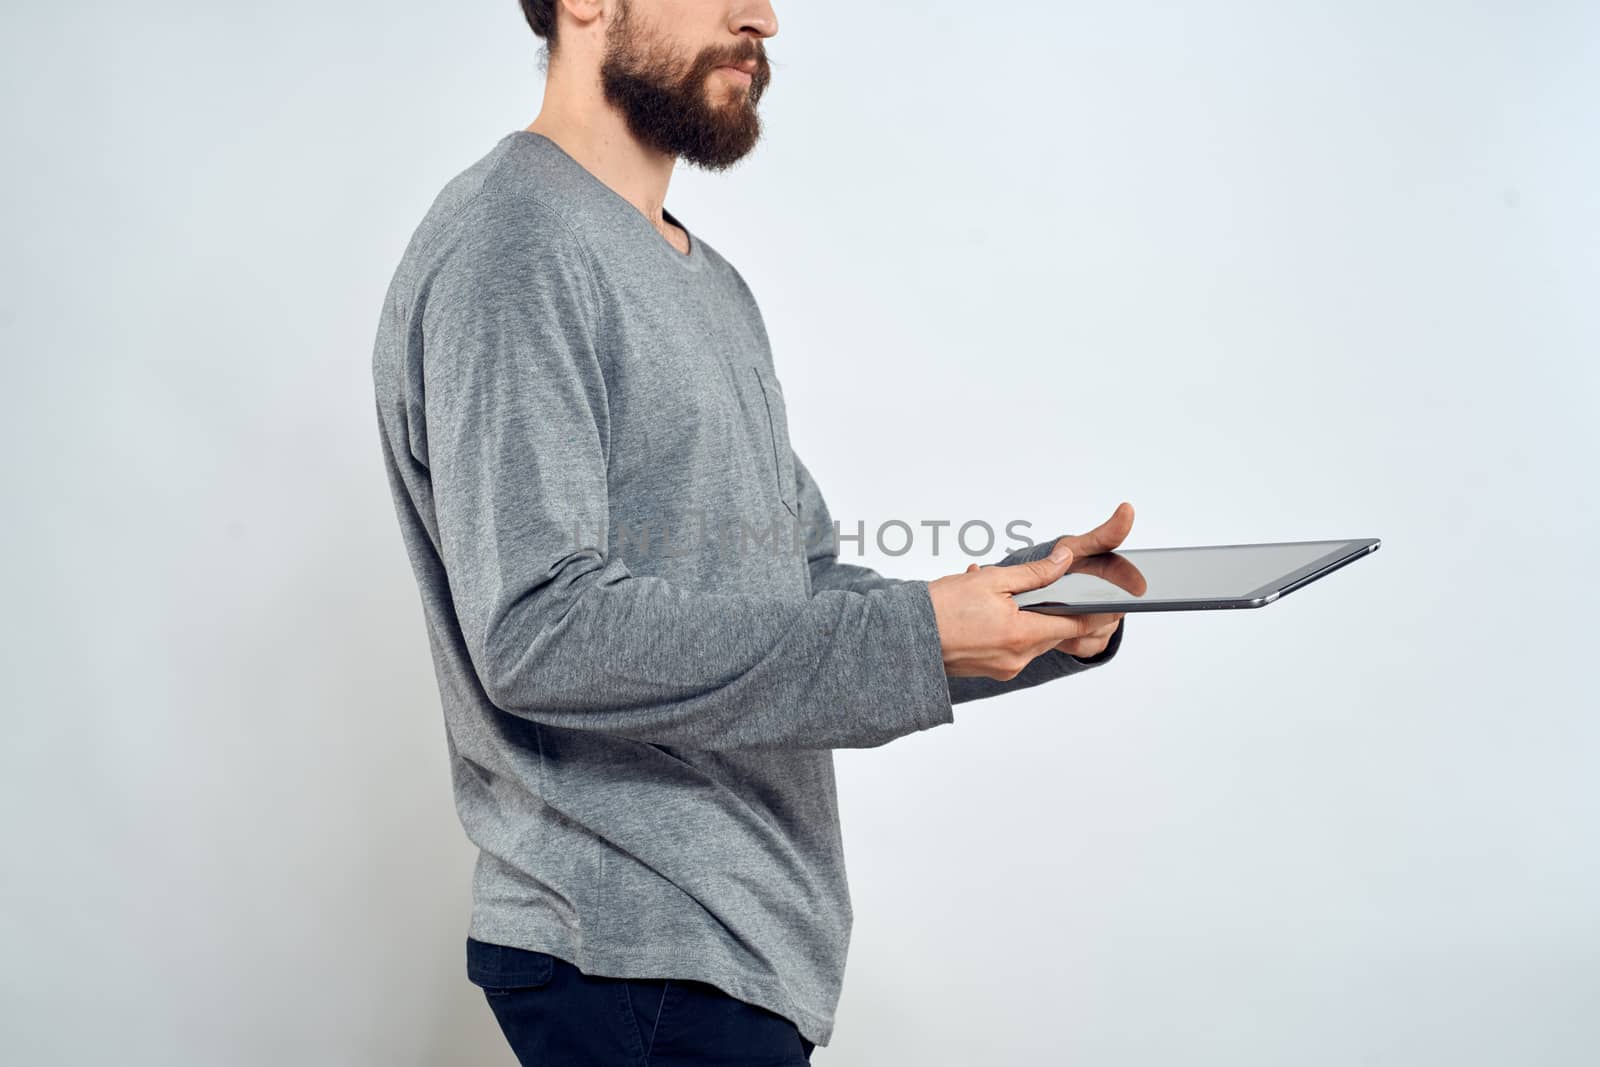 Man with tablet in hands technology lifestyle internet communication work light background cropped view. High quality photo